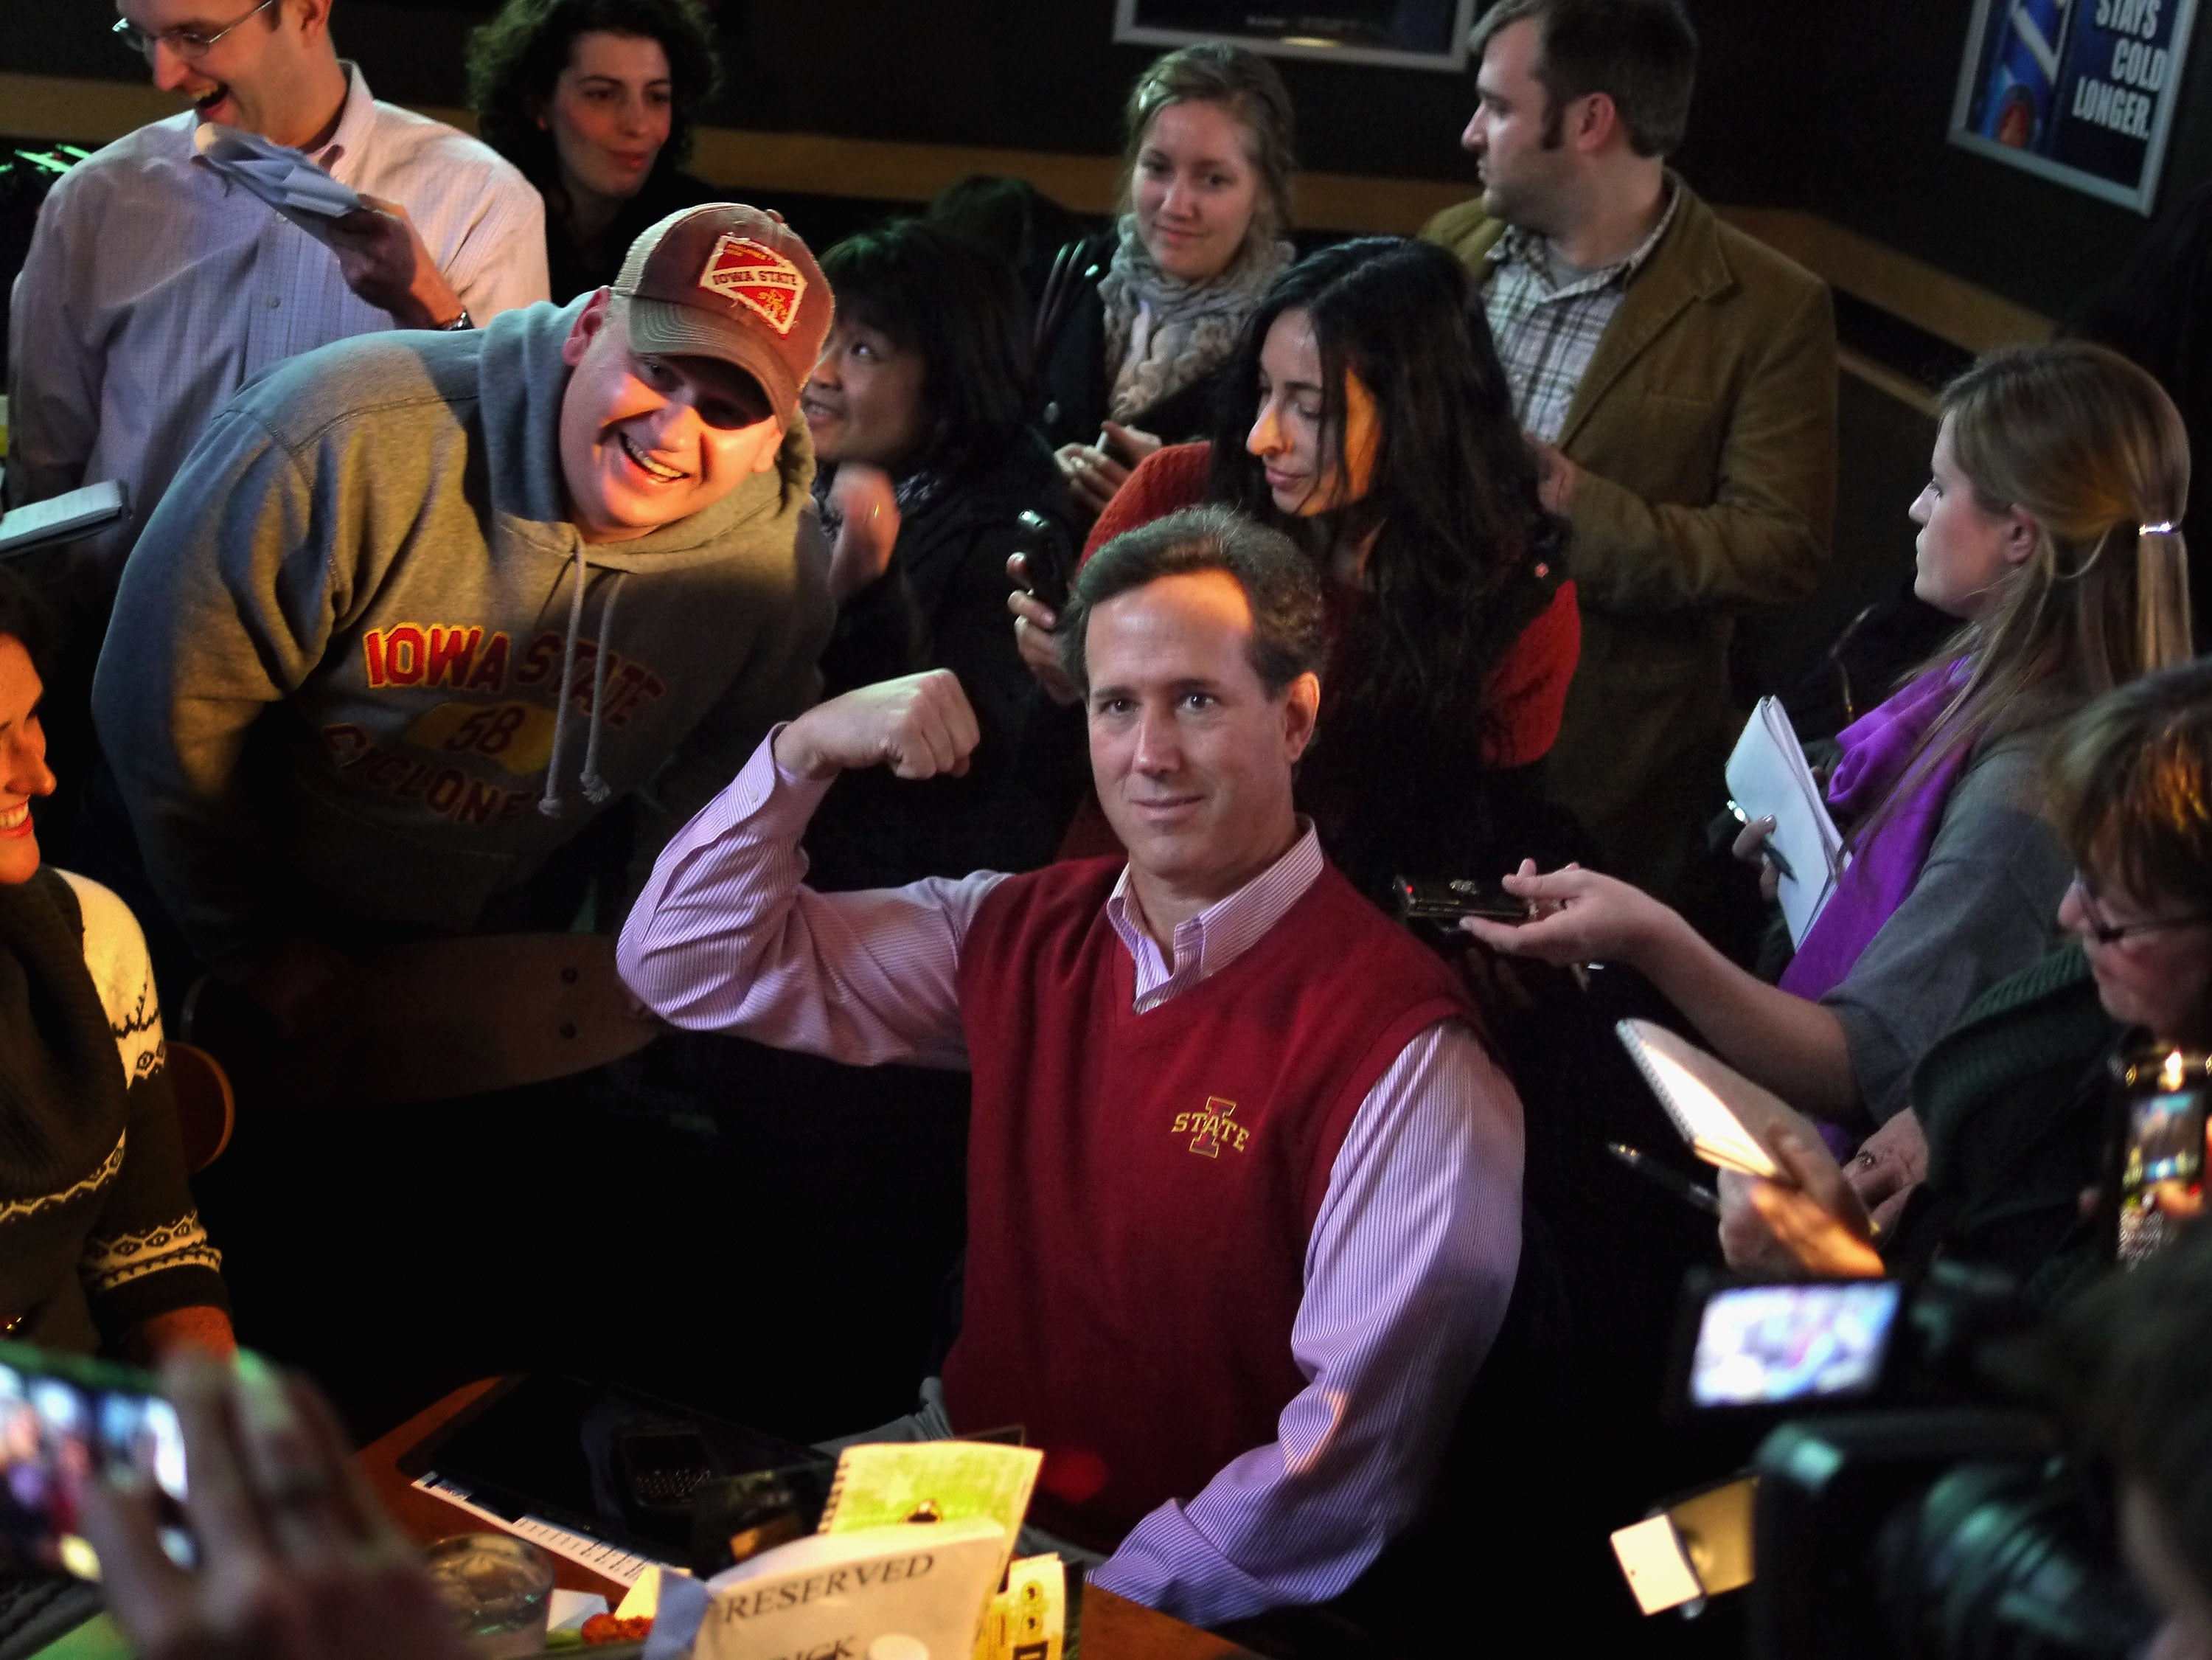 Republican presidential candidate former U.S. Senator Rick Santorum (R-PA) poses for a picture while hosting a Pinstripe Bowl watch party at Buffalo Wild Wings Grill and Bar on December 30, 2011, in Ames, Iowa